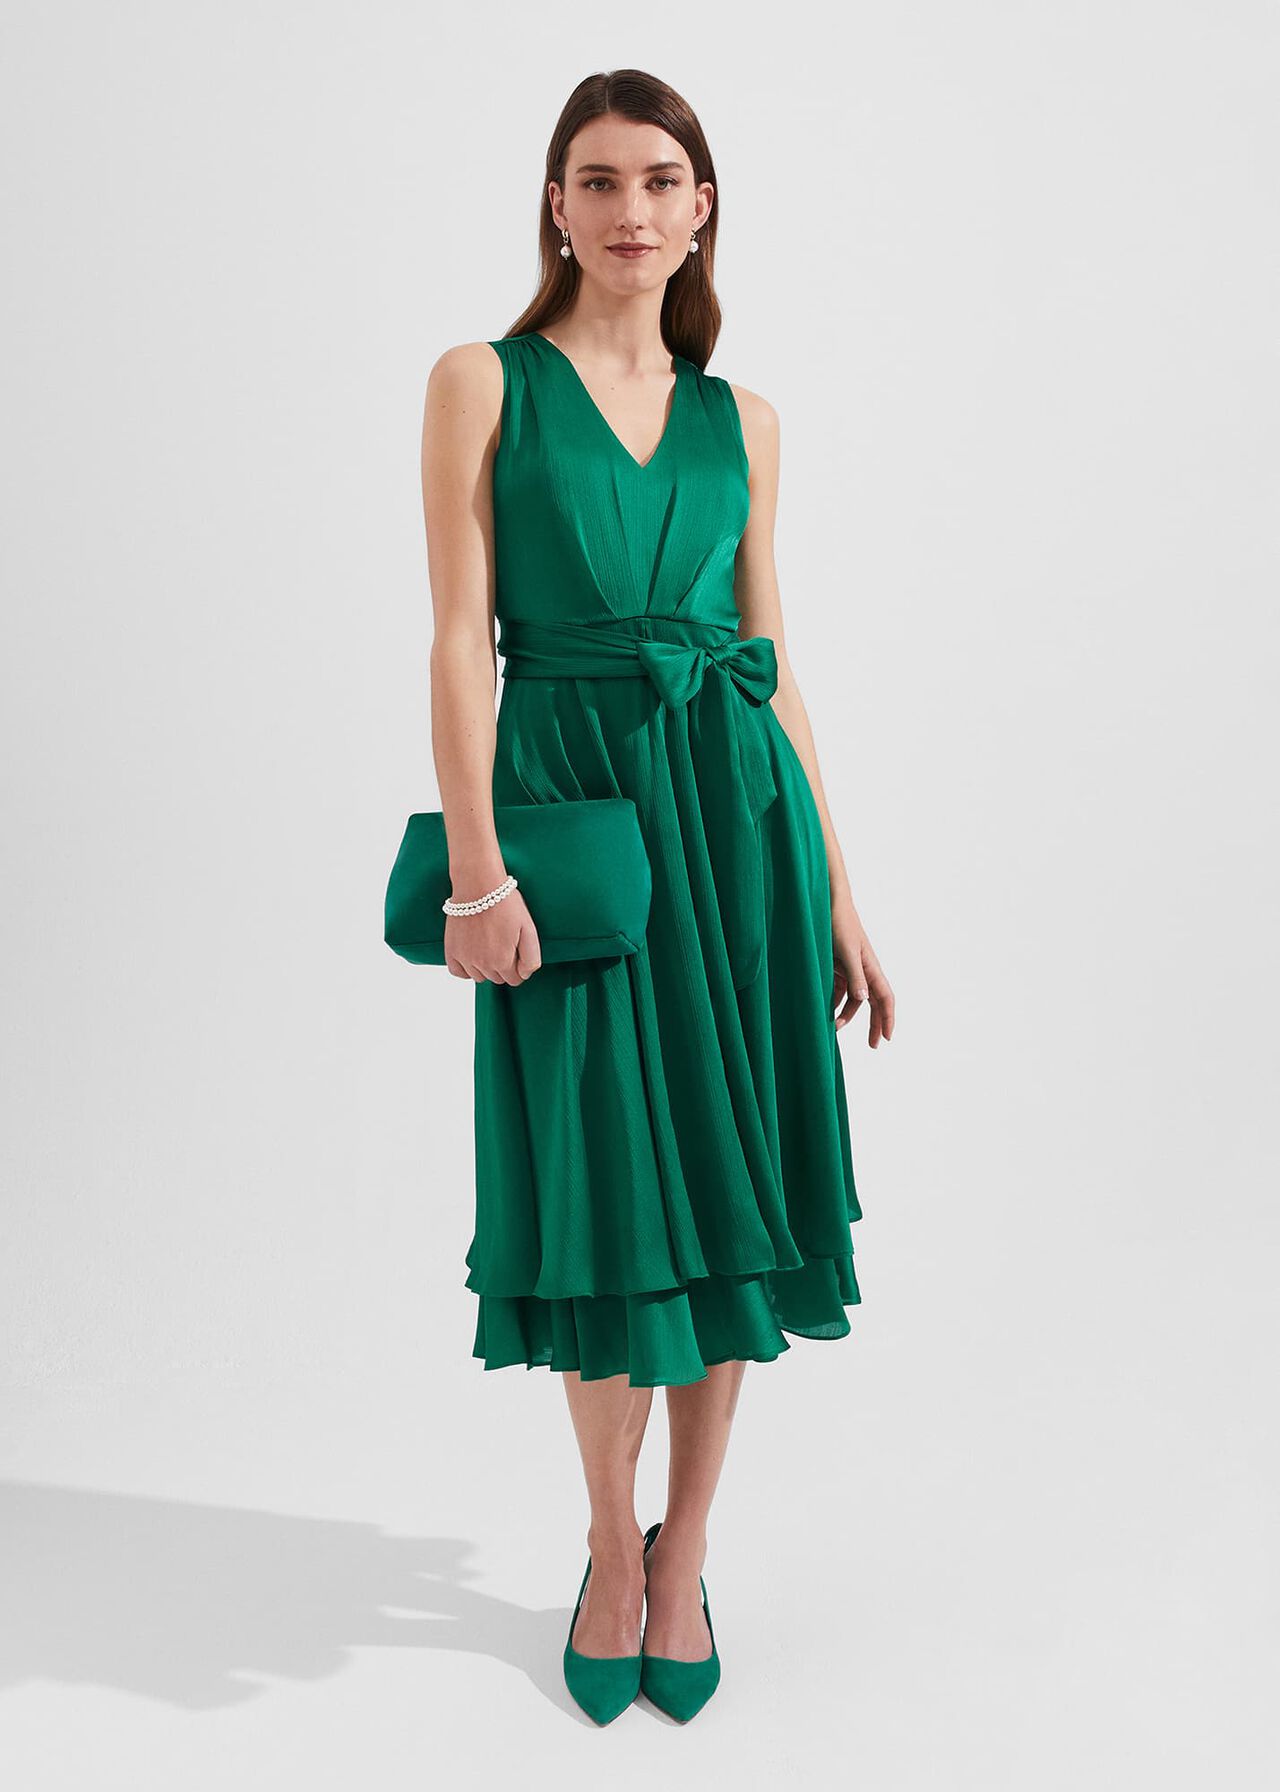 Viola Satin Fit And Flare Dress, Meadow Green, hi-res